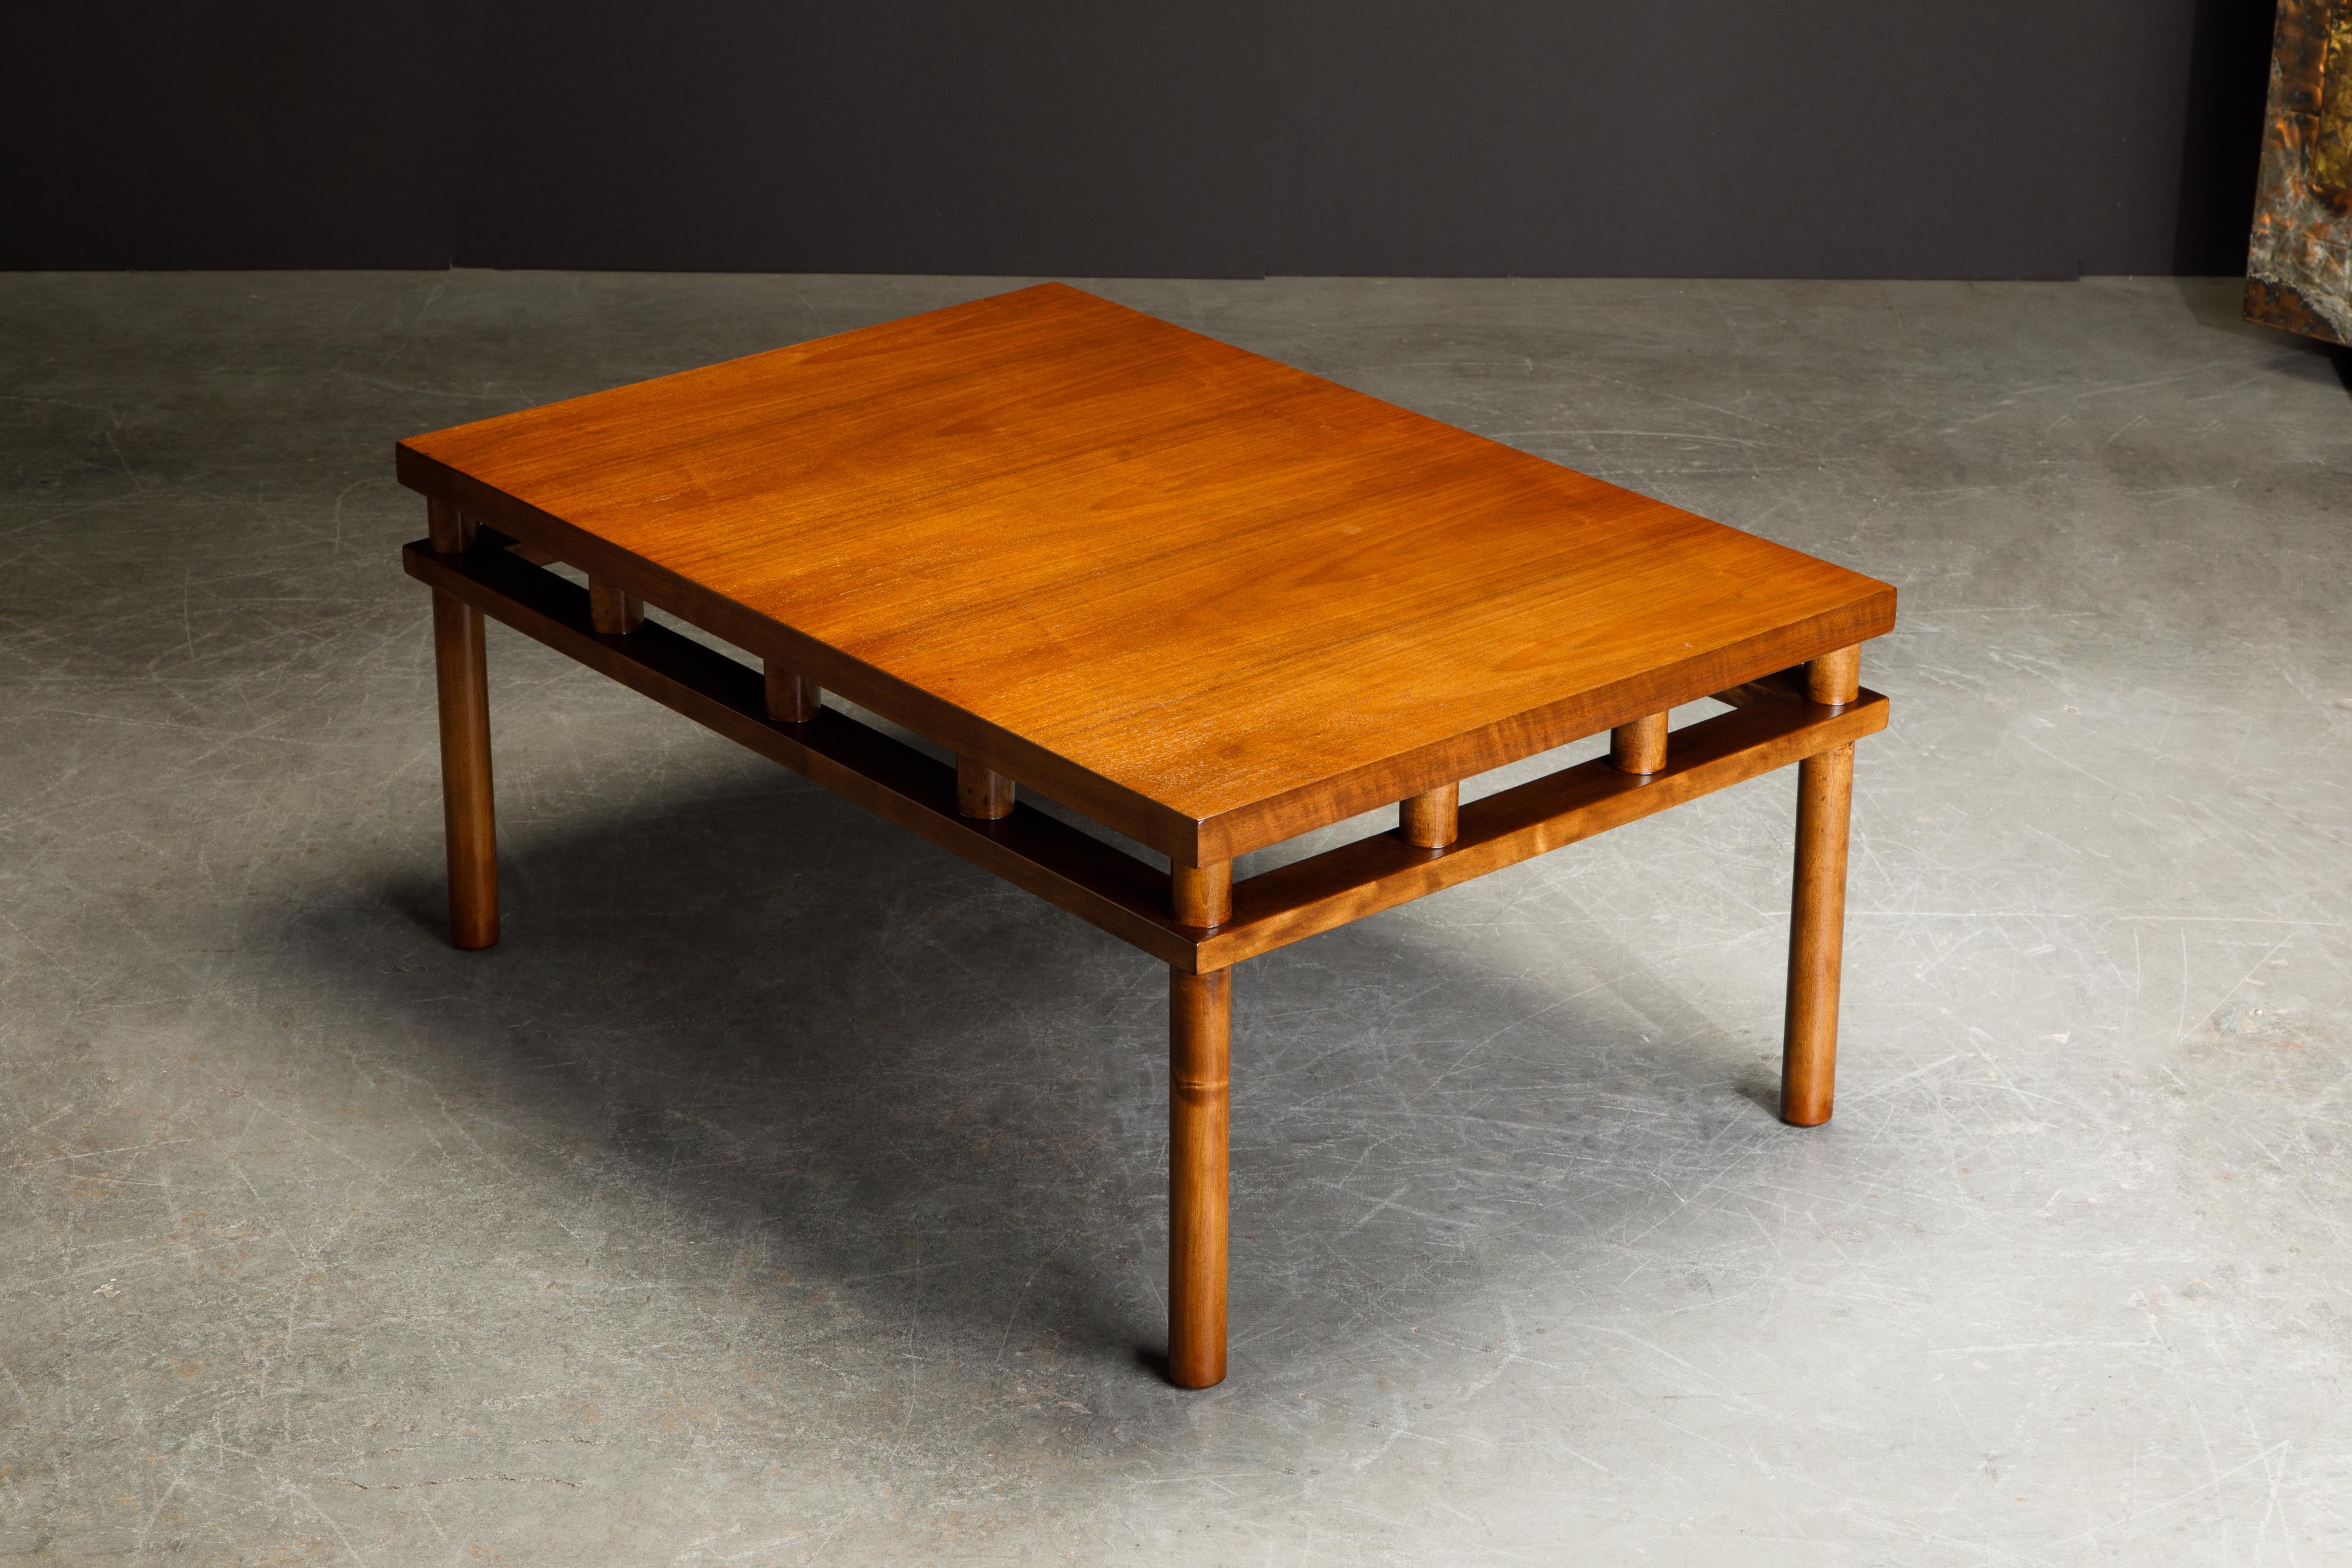 T.H. Robsjohn Gibbings for Widdicomb Model 1761 Coffee Table, 1953, Signed In Excellent Condition For Sale In Los Angeles, CA